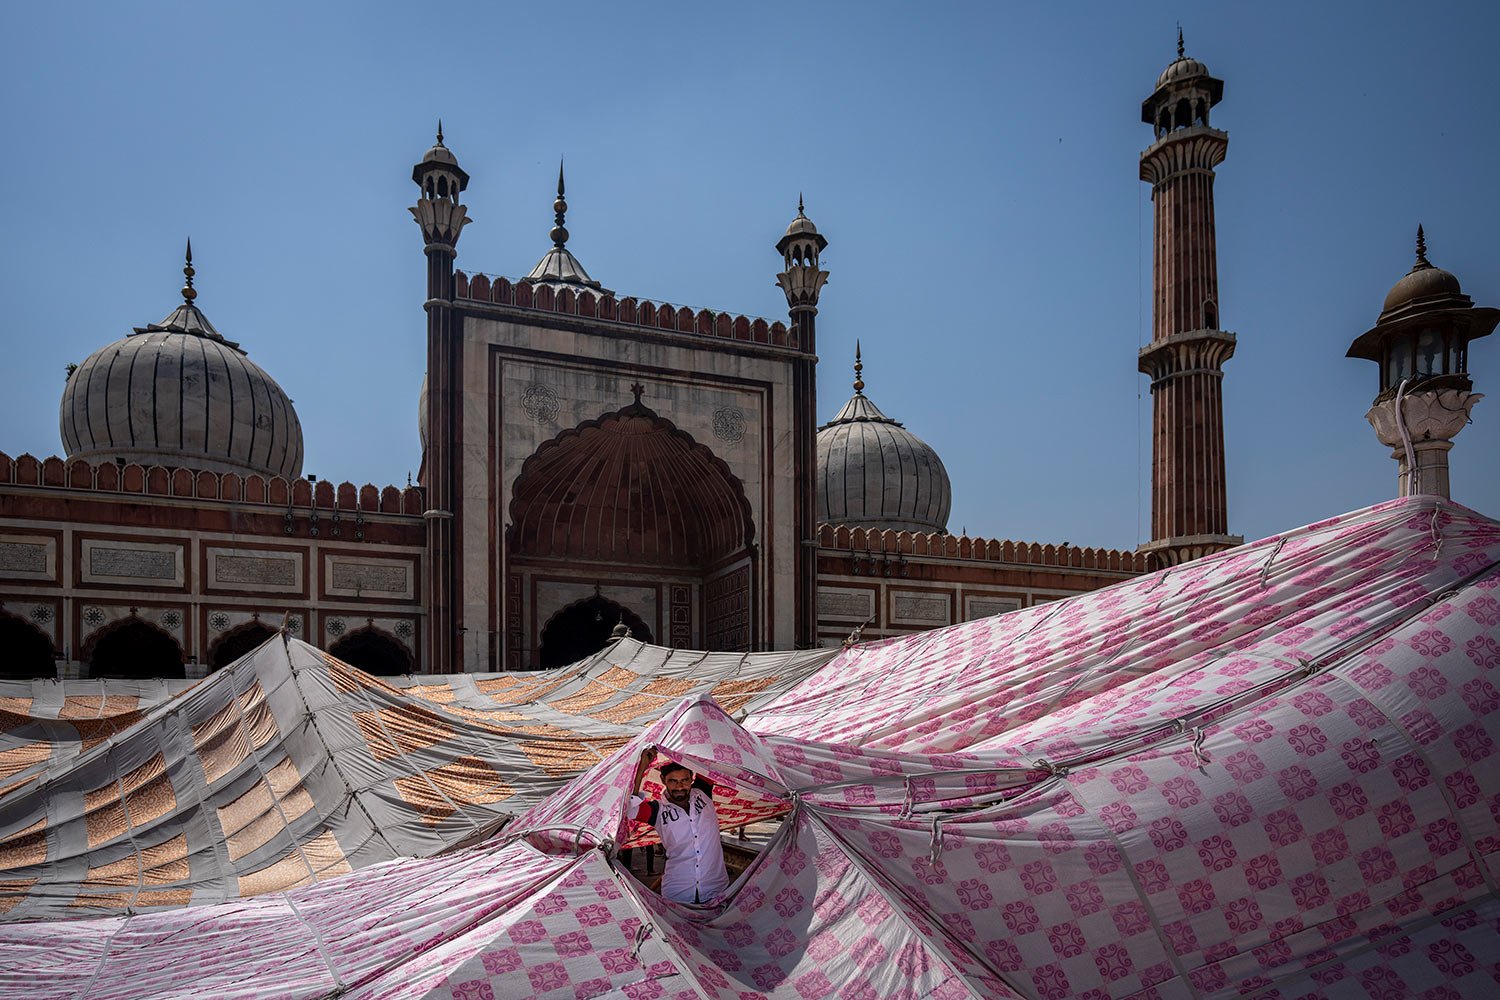  An Indian Muslim man looks through a sunshade tent erected for worshippers in the compound of Jama Masjid on the first Friday of the holy fasting month of Ramadan in New Delhi, India, Friday, April 8, 2022. (AP Photo/Altaf Qadri) 